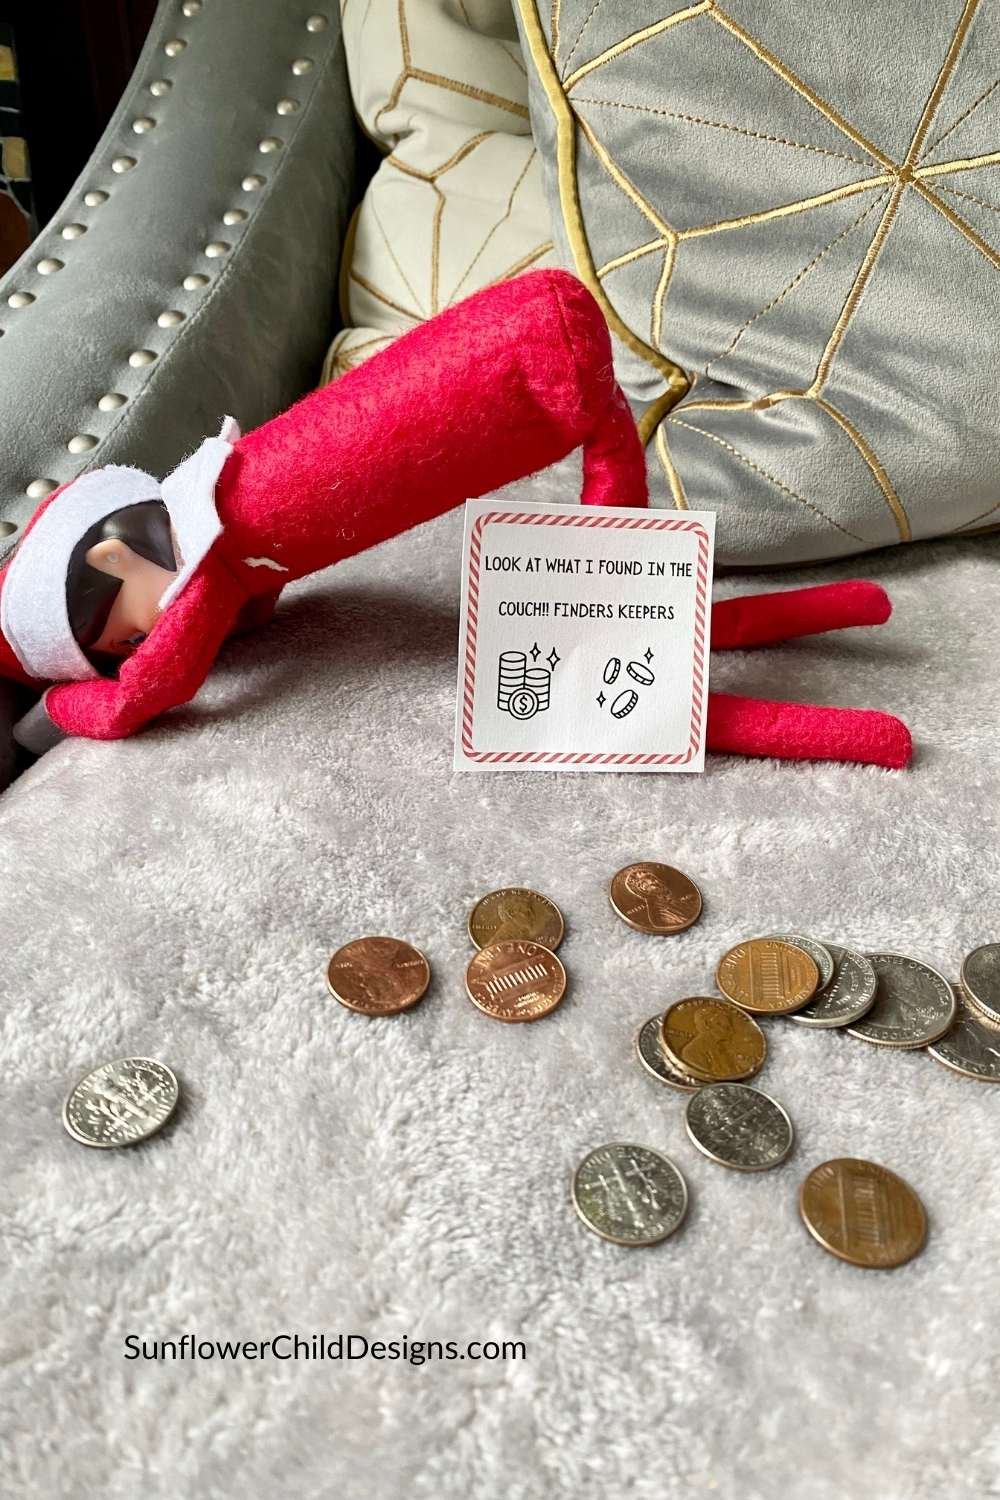 Elf finds change in the cushion